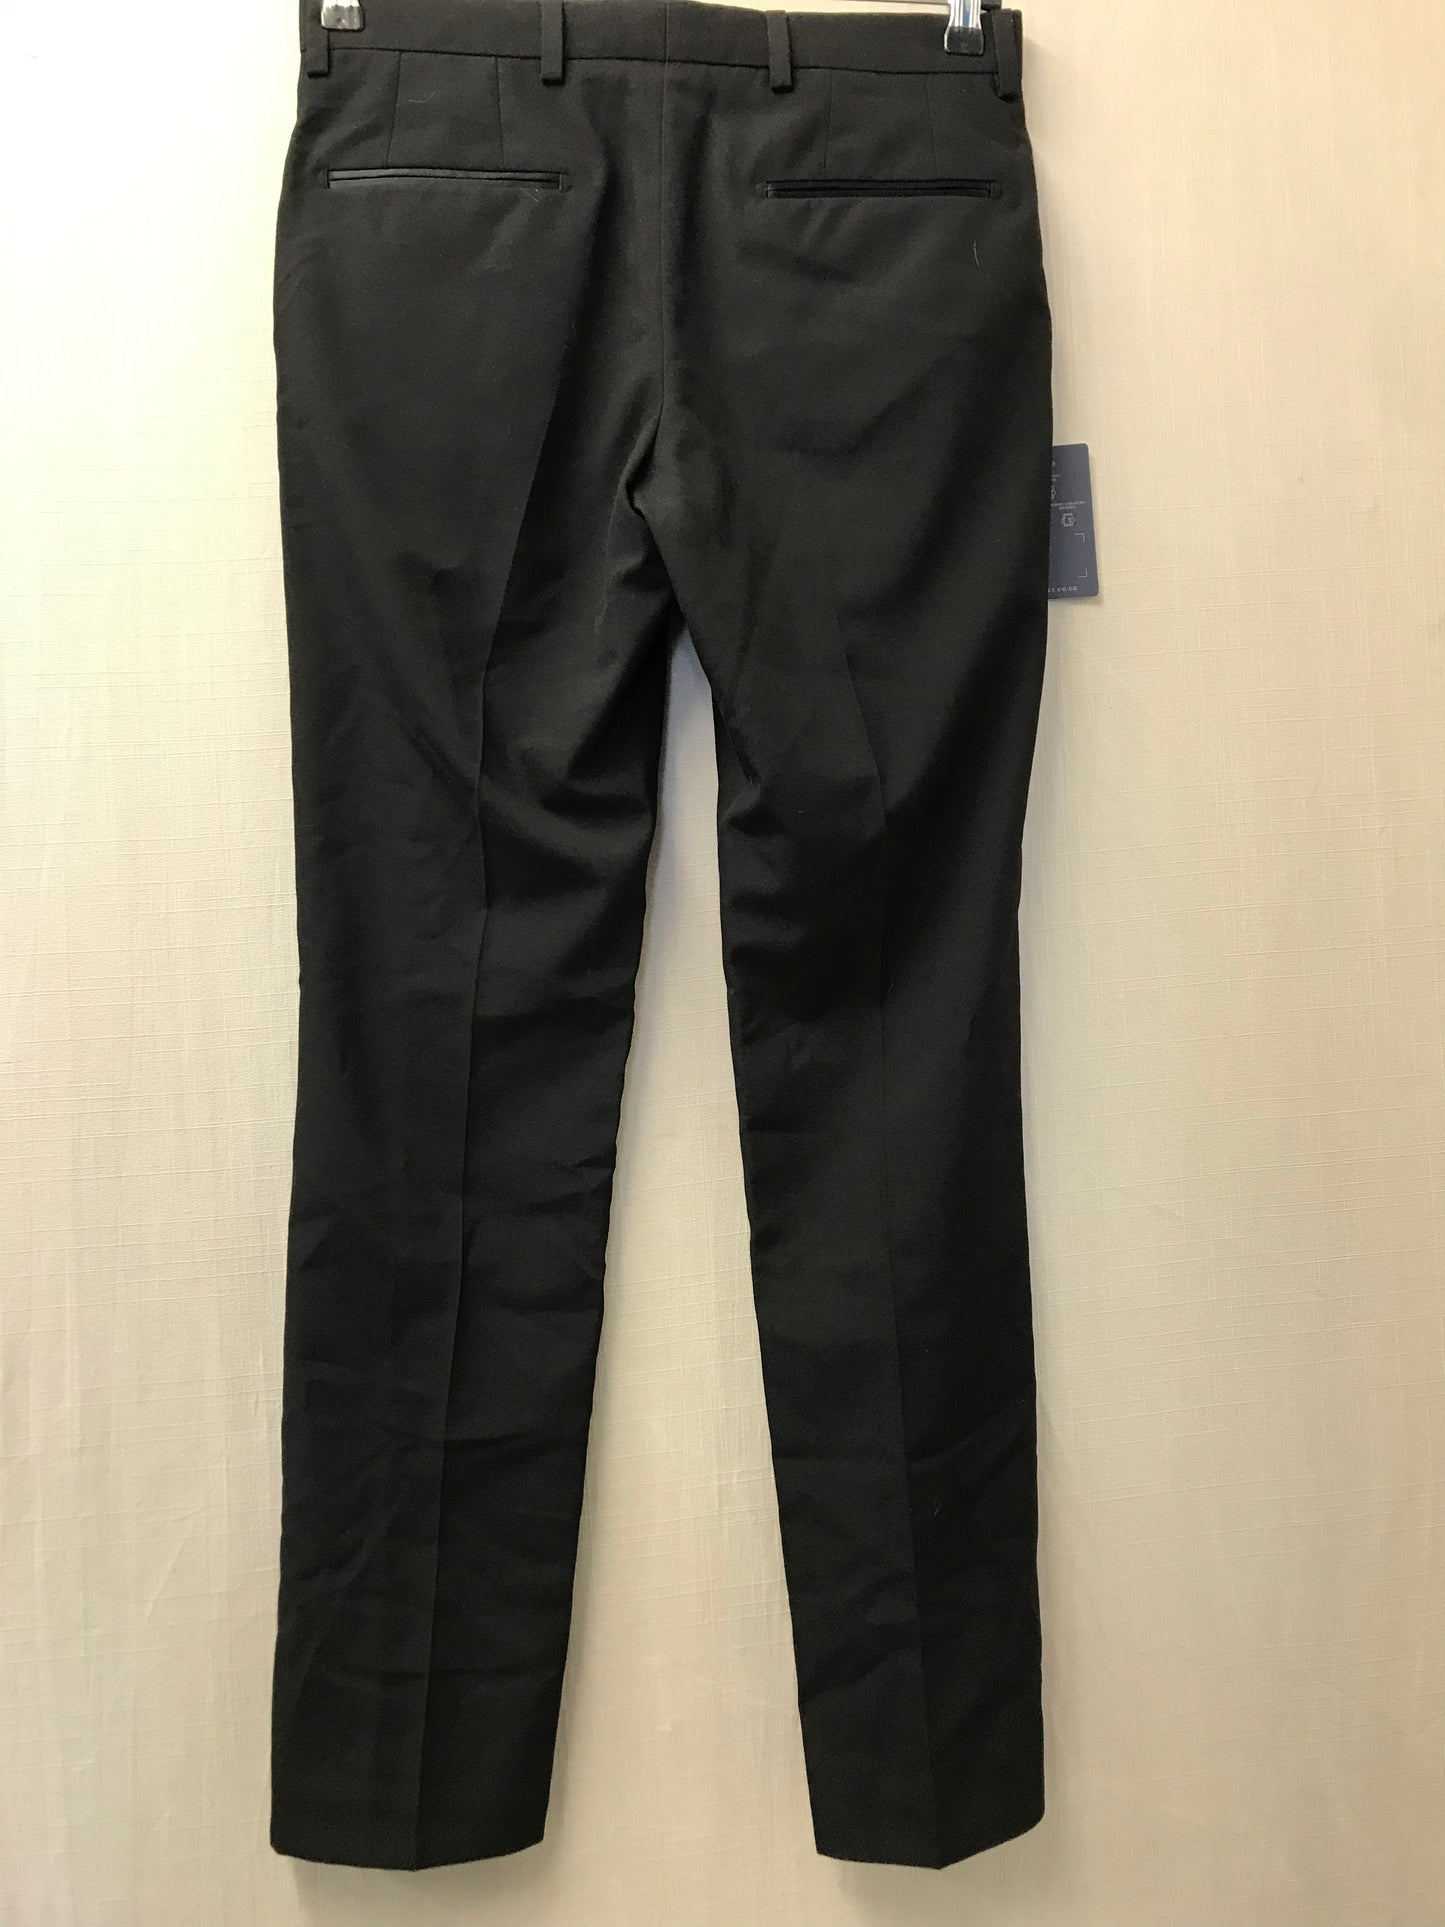 Next Occasions Black Trousers Size 30R BNWT